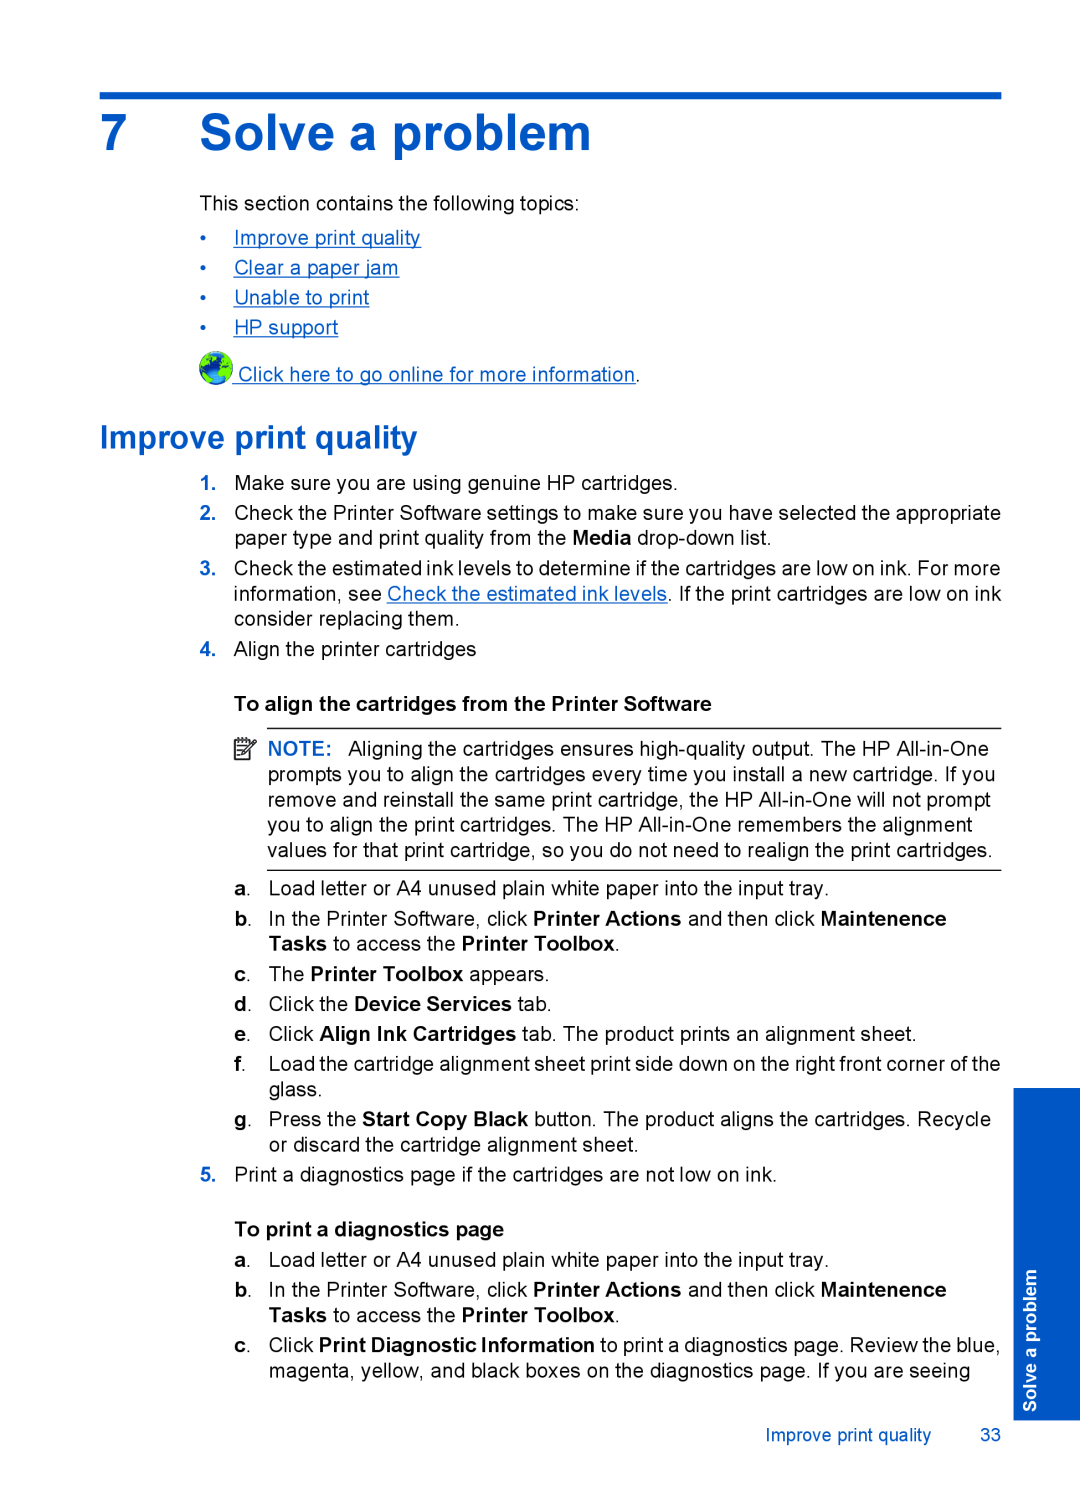 HP 1055 - J410e, 1051, 1050 - J410a Solve a problem, Improve print quality Clear a paper jam Unable to print HP support 